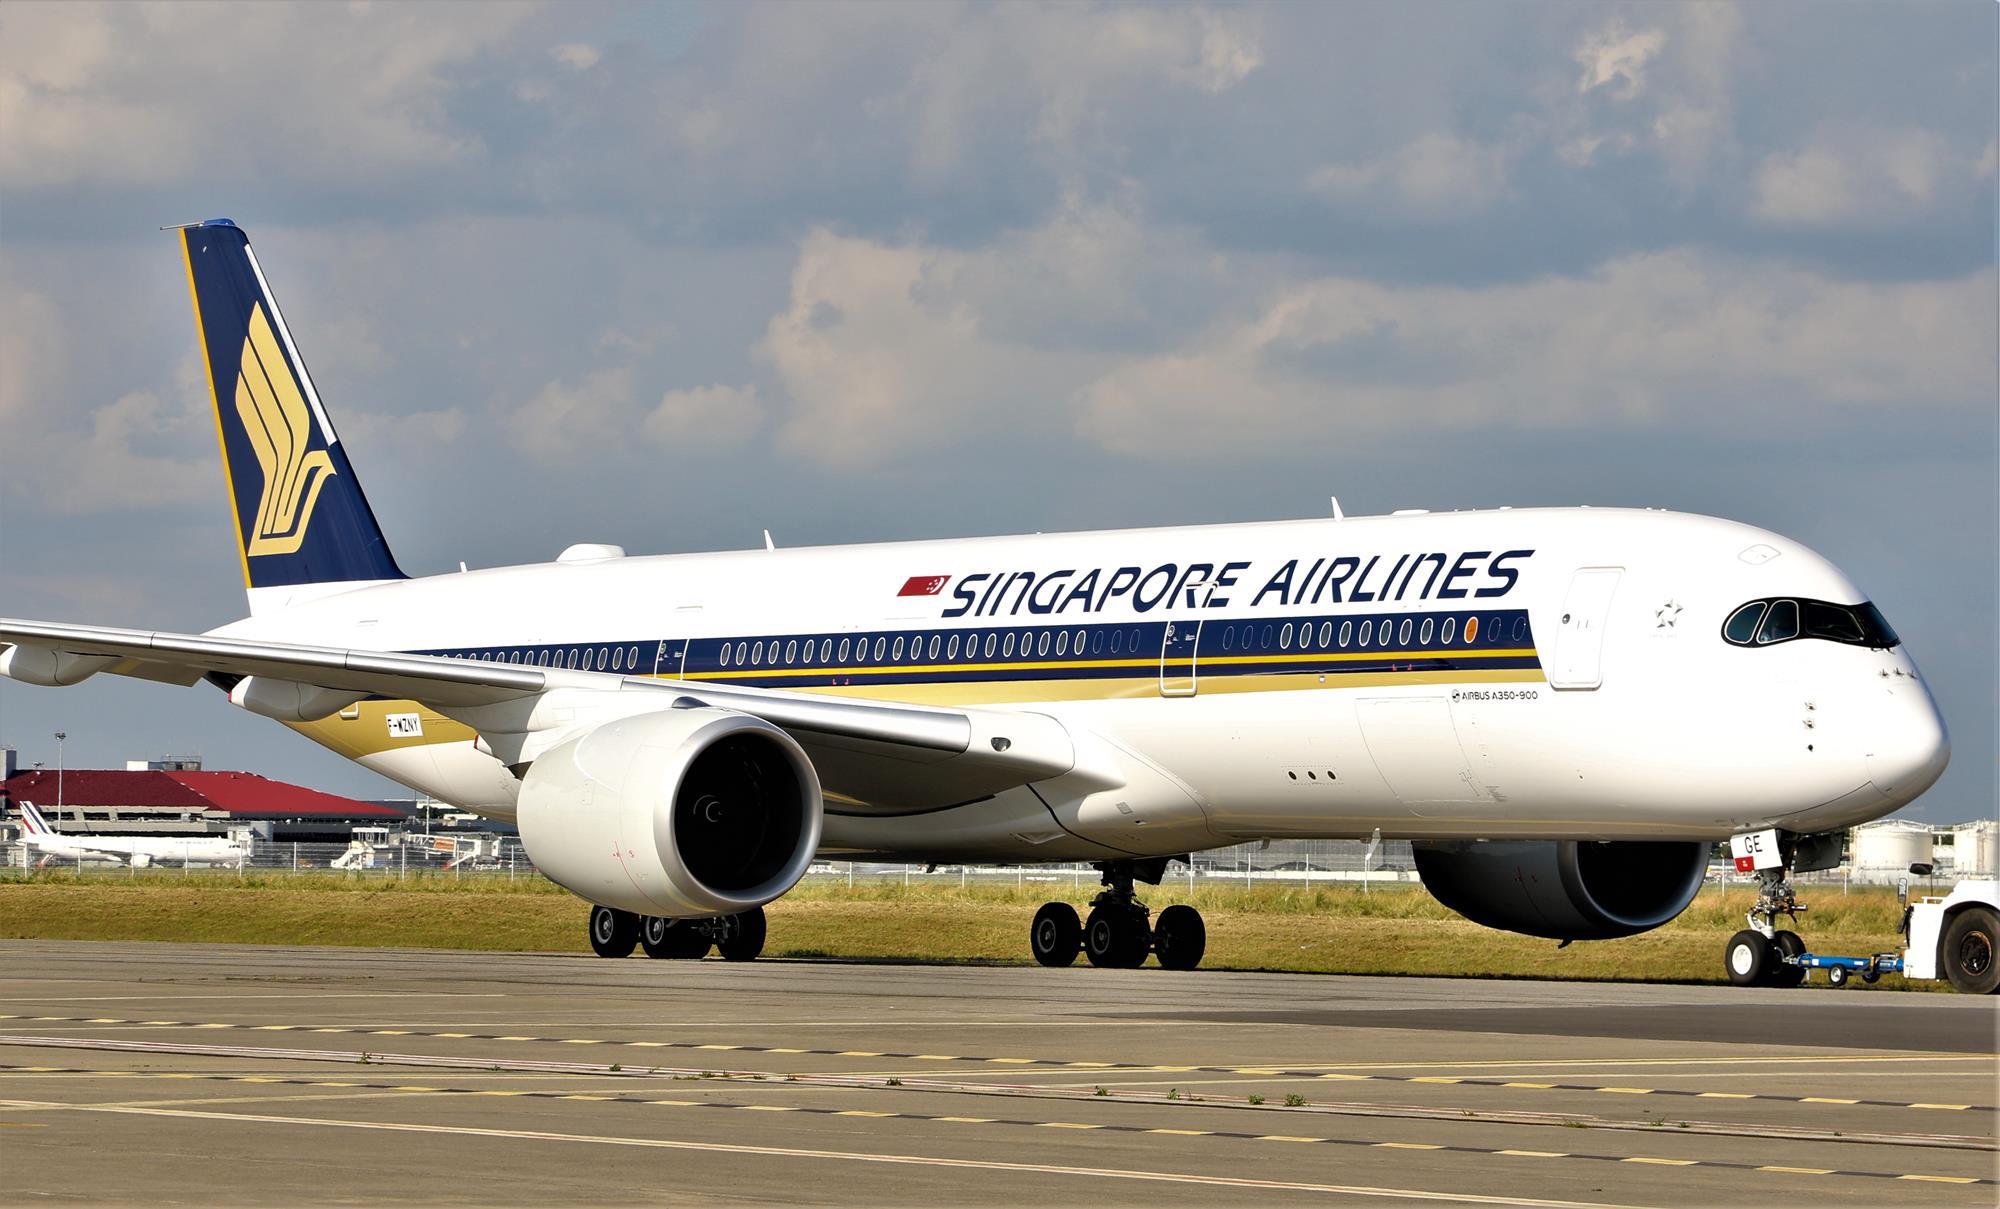 Emirates United Airlines Aircraft Illustration Prints Singapore Airlines 